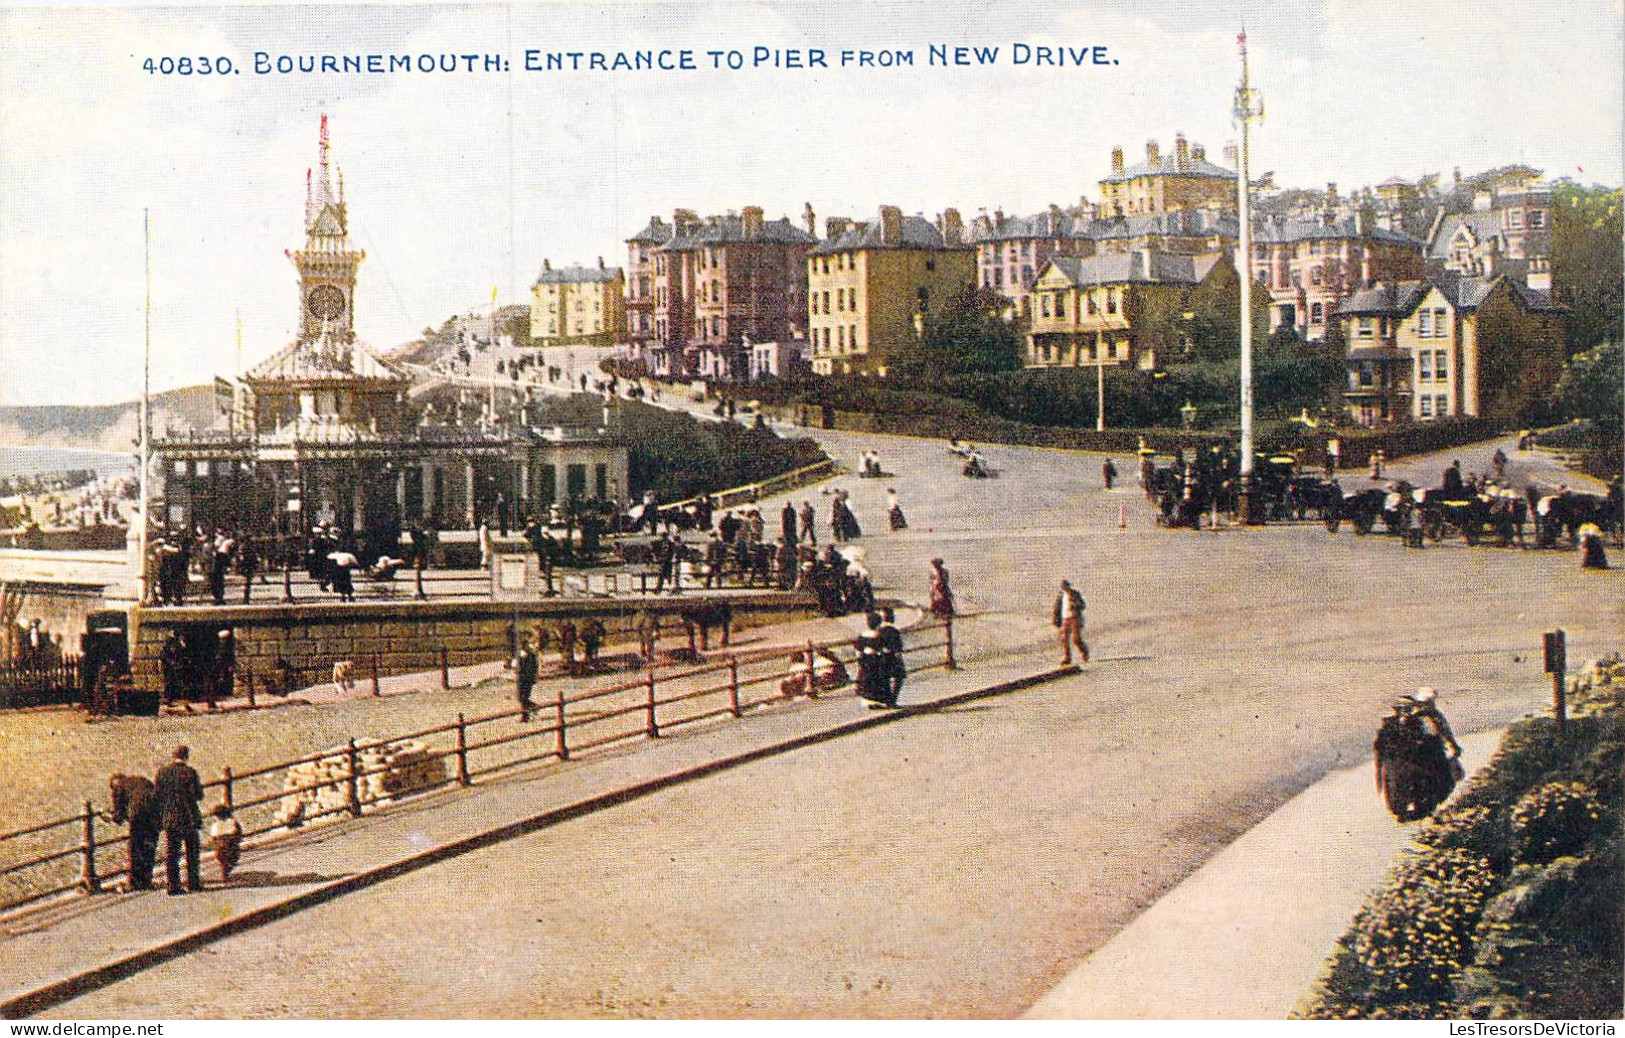 ANGLETERRE - Bournemouth - Entrance To Pier From New Drive - Carte Postale Ancienne - Bournemouth (desde 1972)